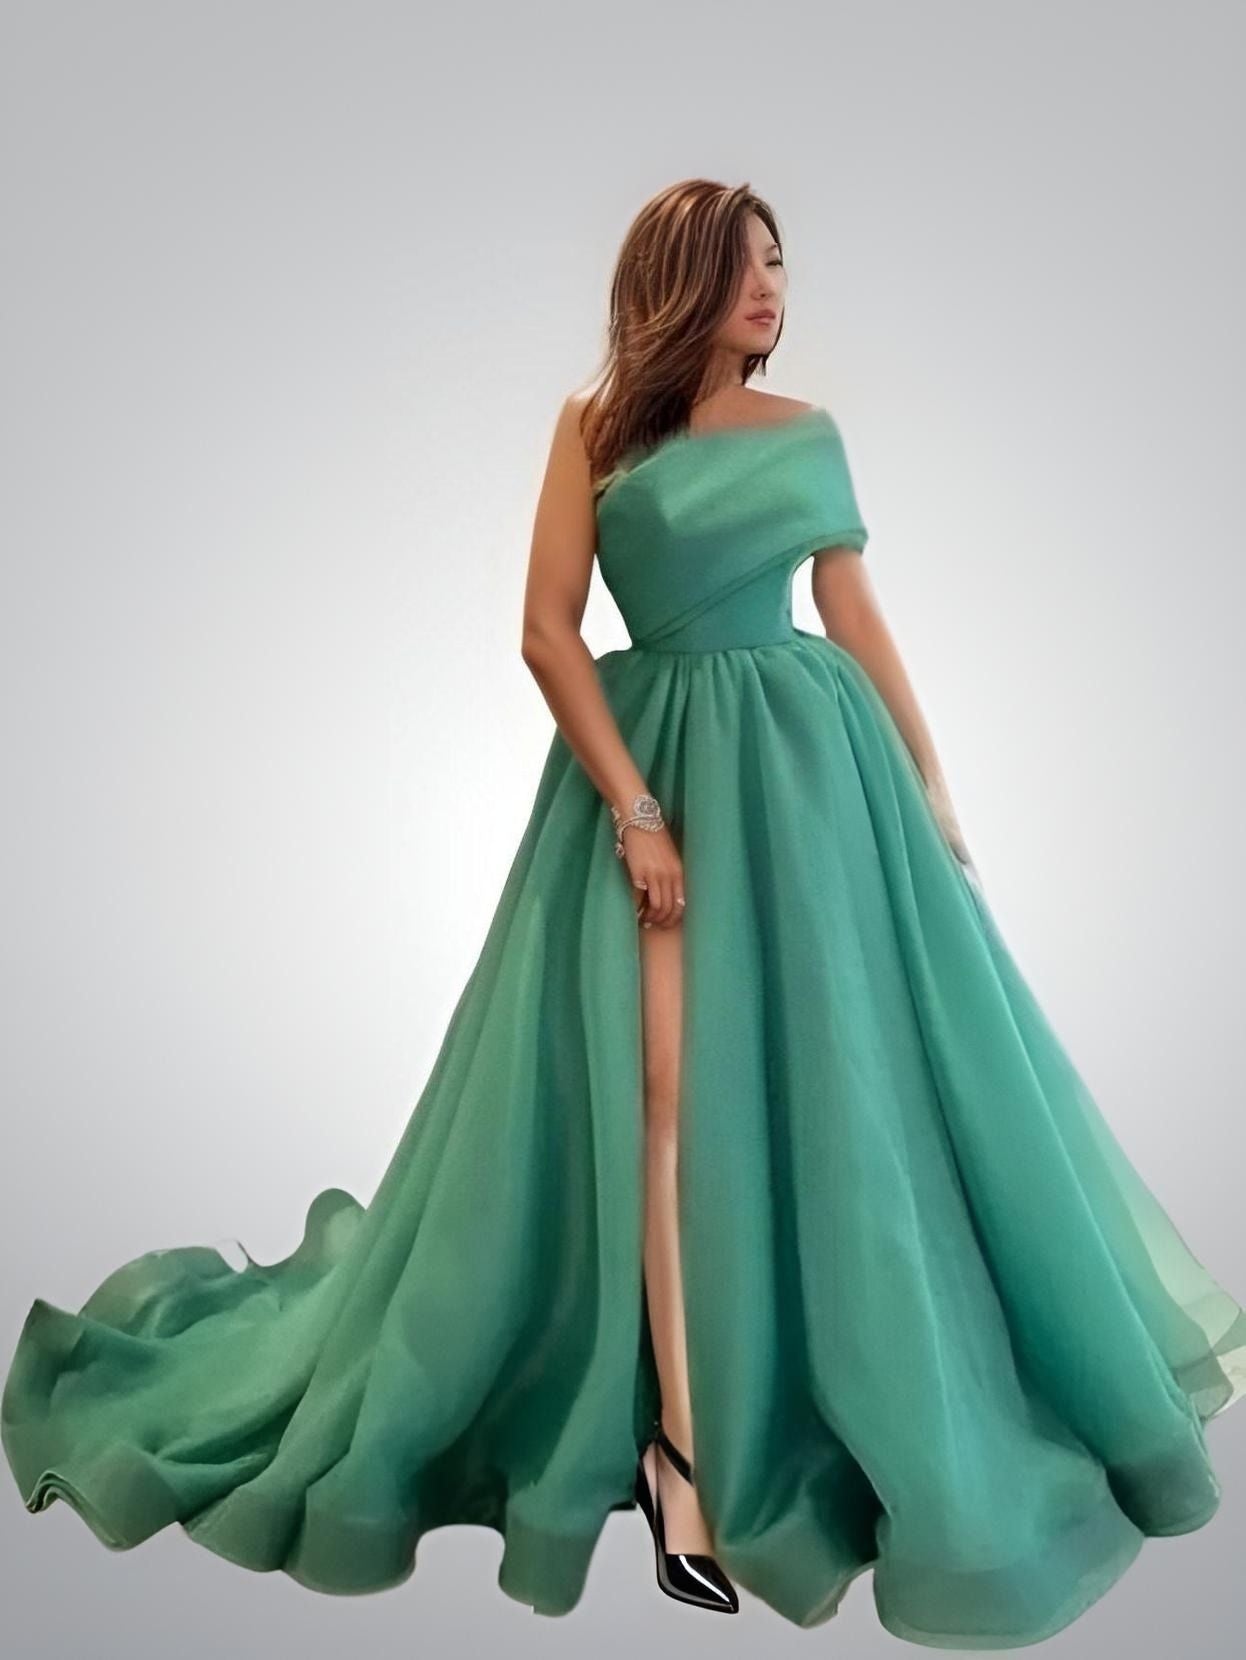 Woman wearing Green One Shoulder High Slit A-Line Prom Dress